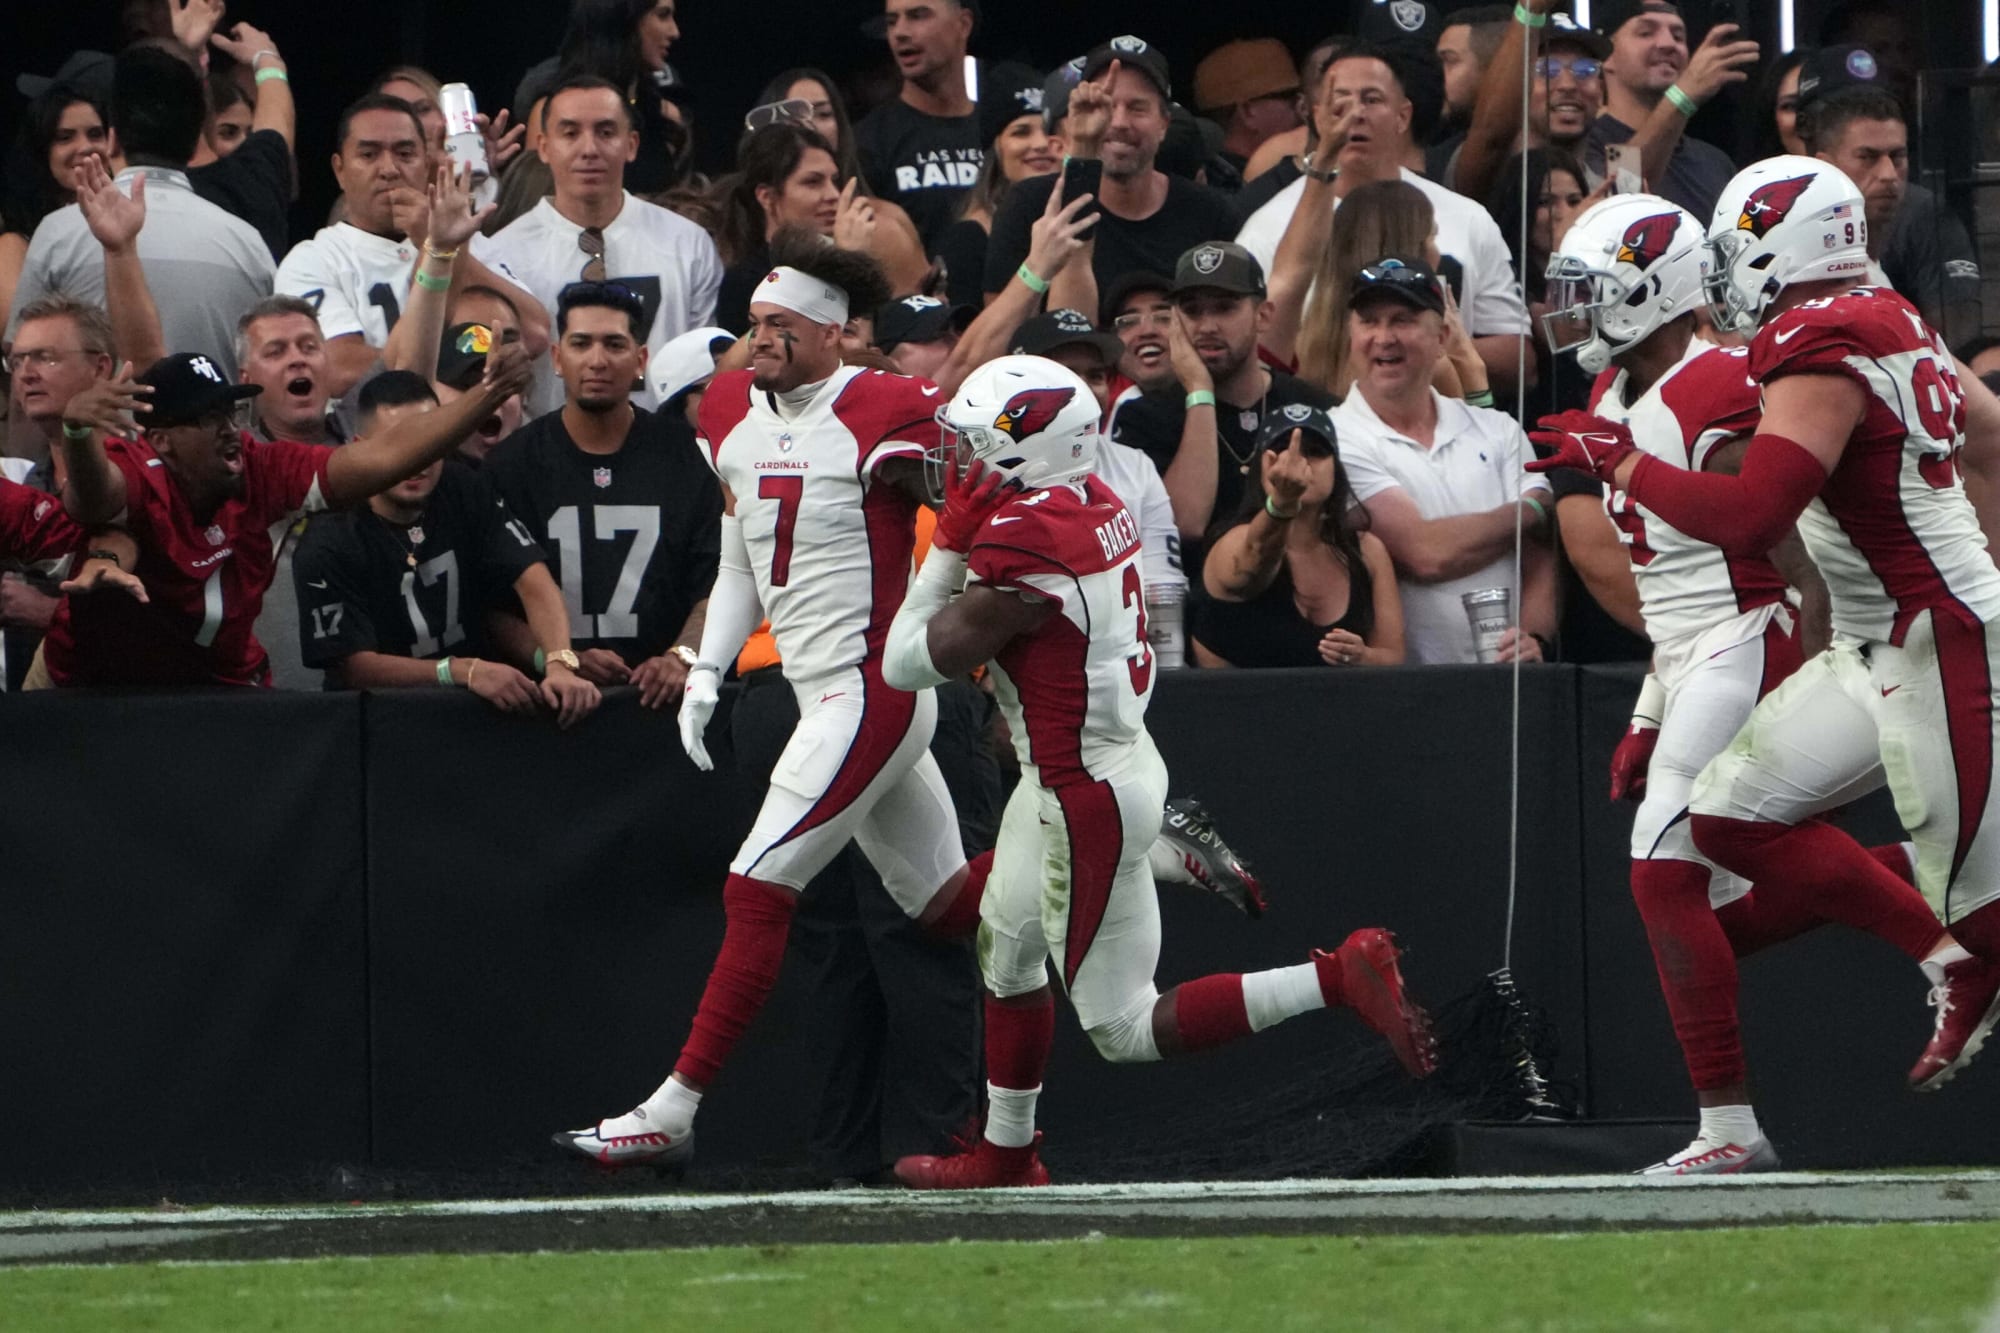 Mind-boggling stats from the Arizona Cardinals vs. Raiders